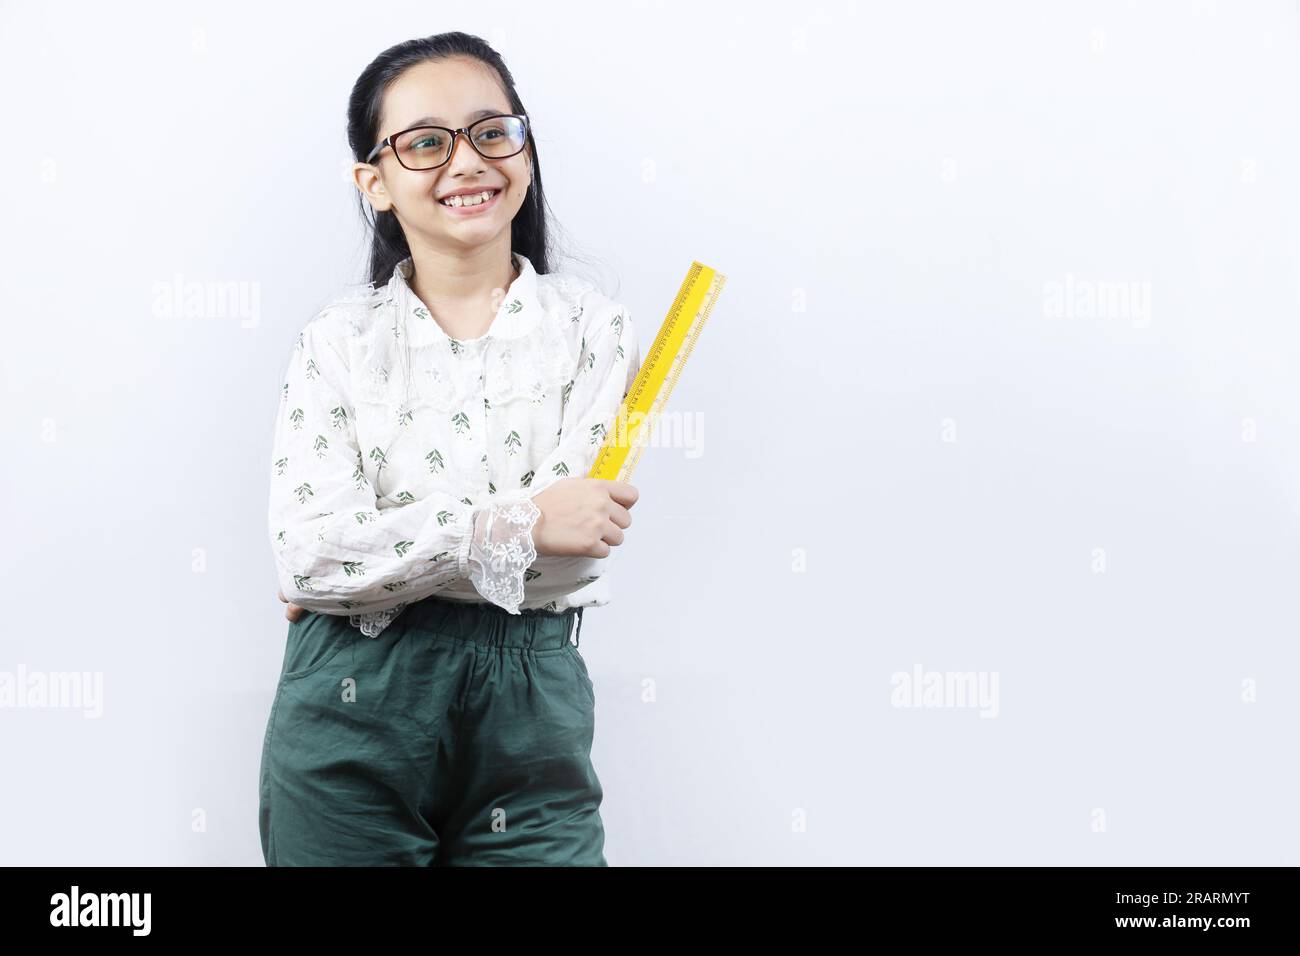 Young girl teaching. Portrait of Happy Indian teenage girl holding a measuring scale in hand and wearing spectacles. Young class monitor concept. Stock Photo